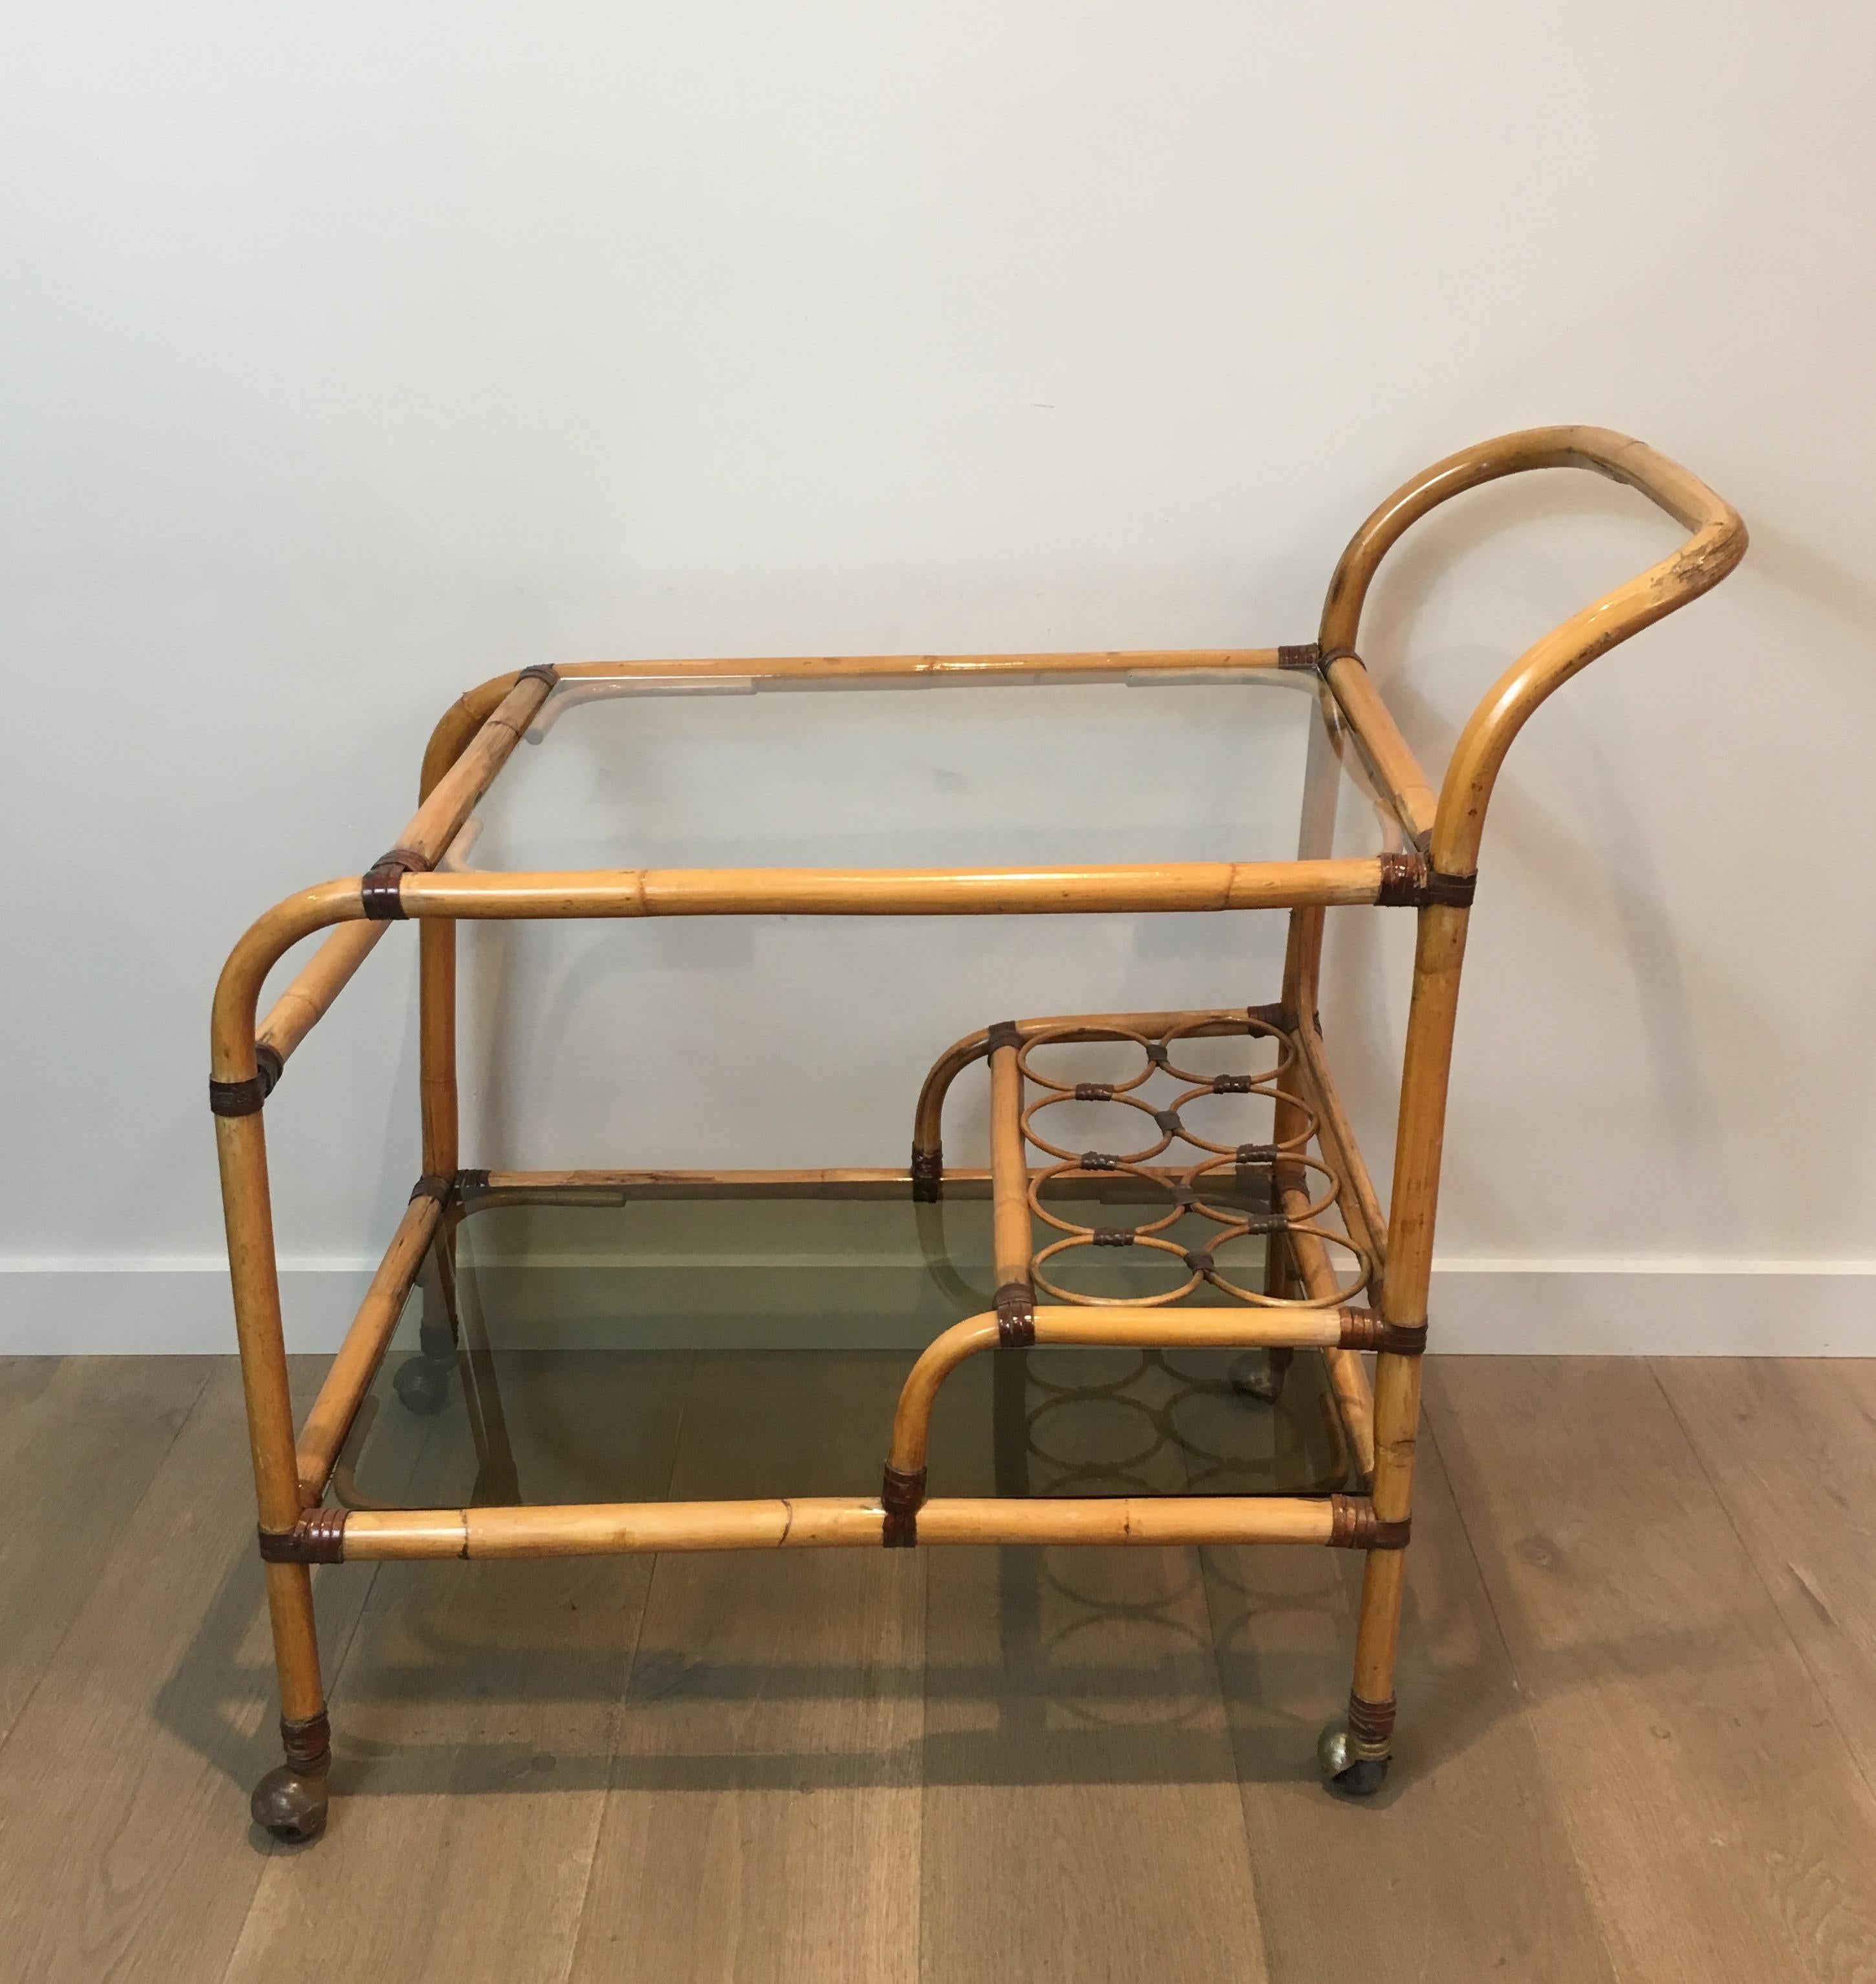 Interesting Rattan Drinks Trolley with Leather Links, French, circa 1950 For Sale 7